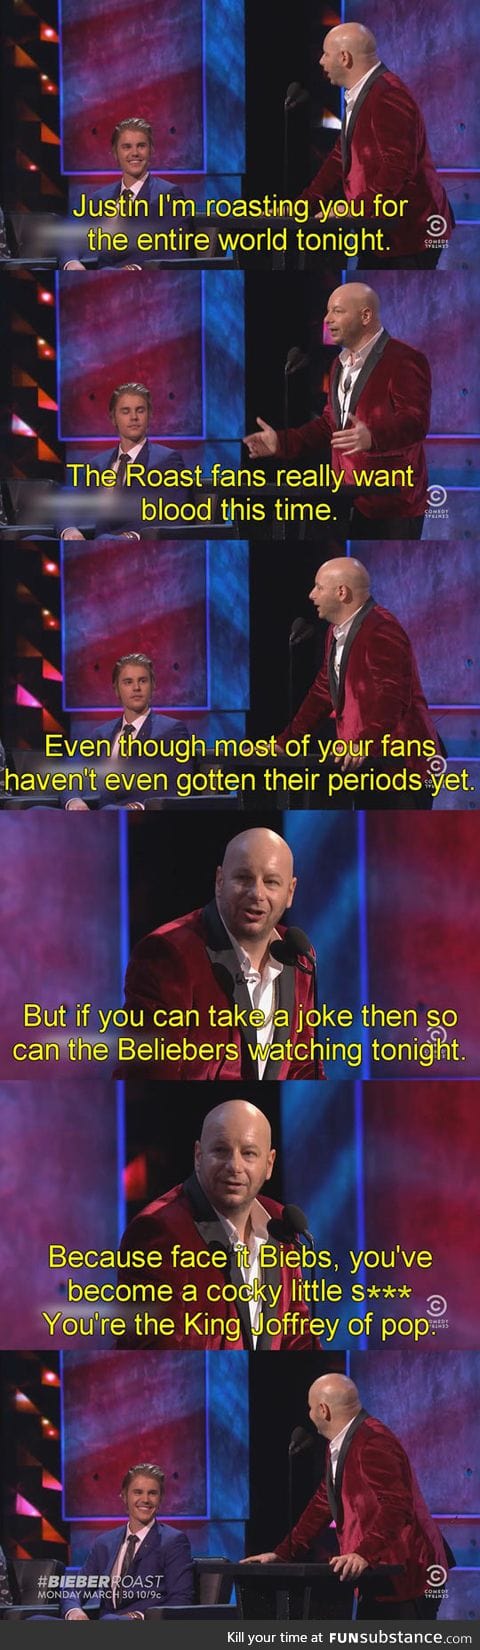 The roast of justin bieber